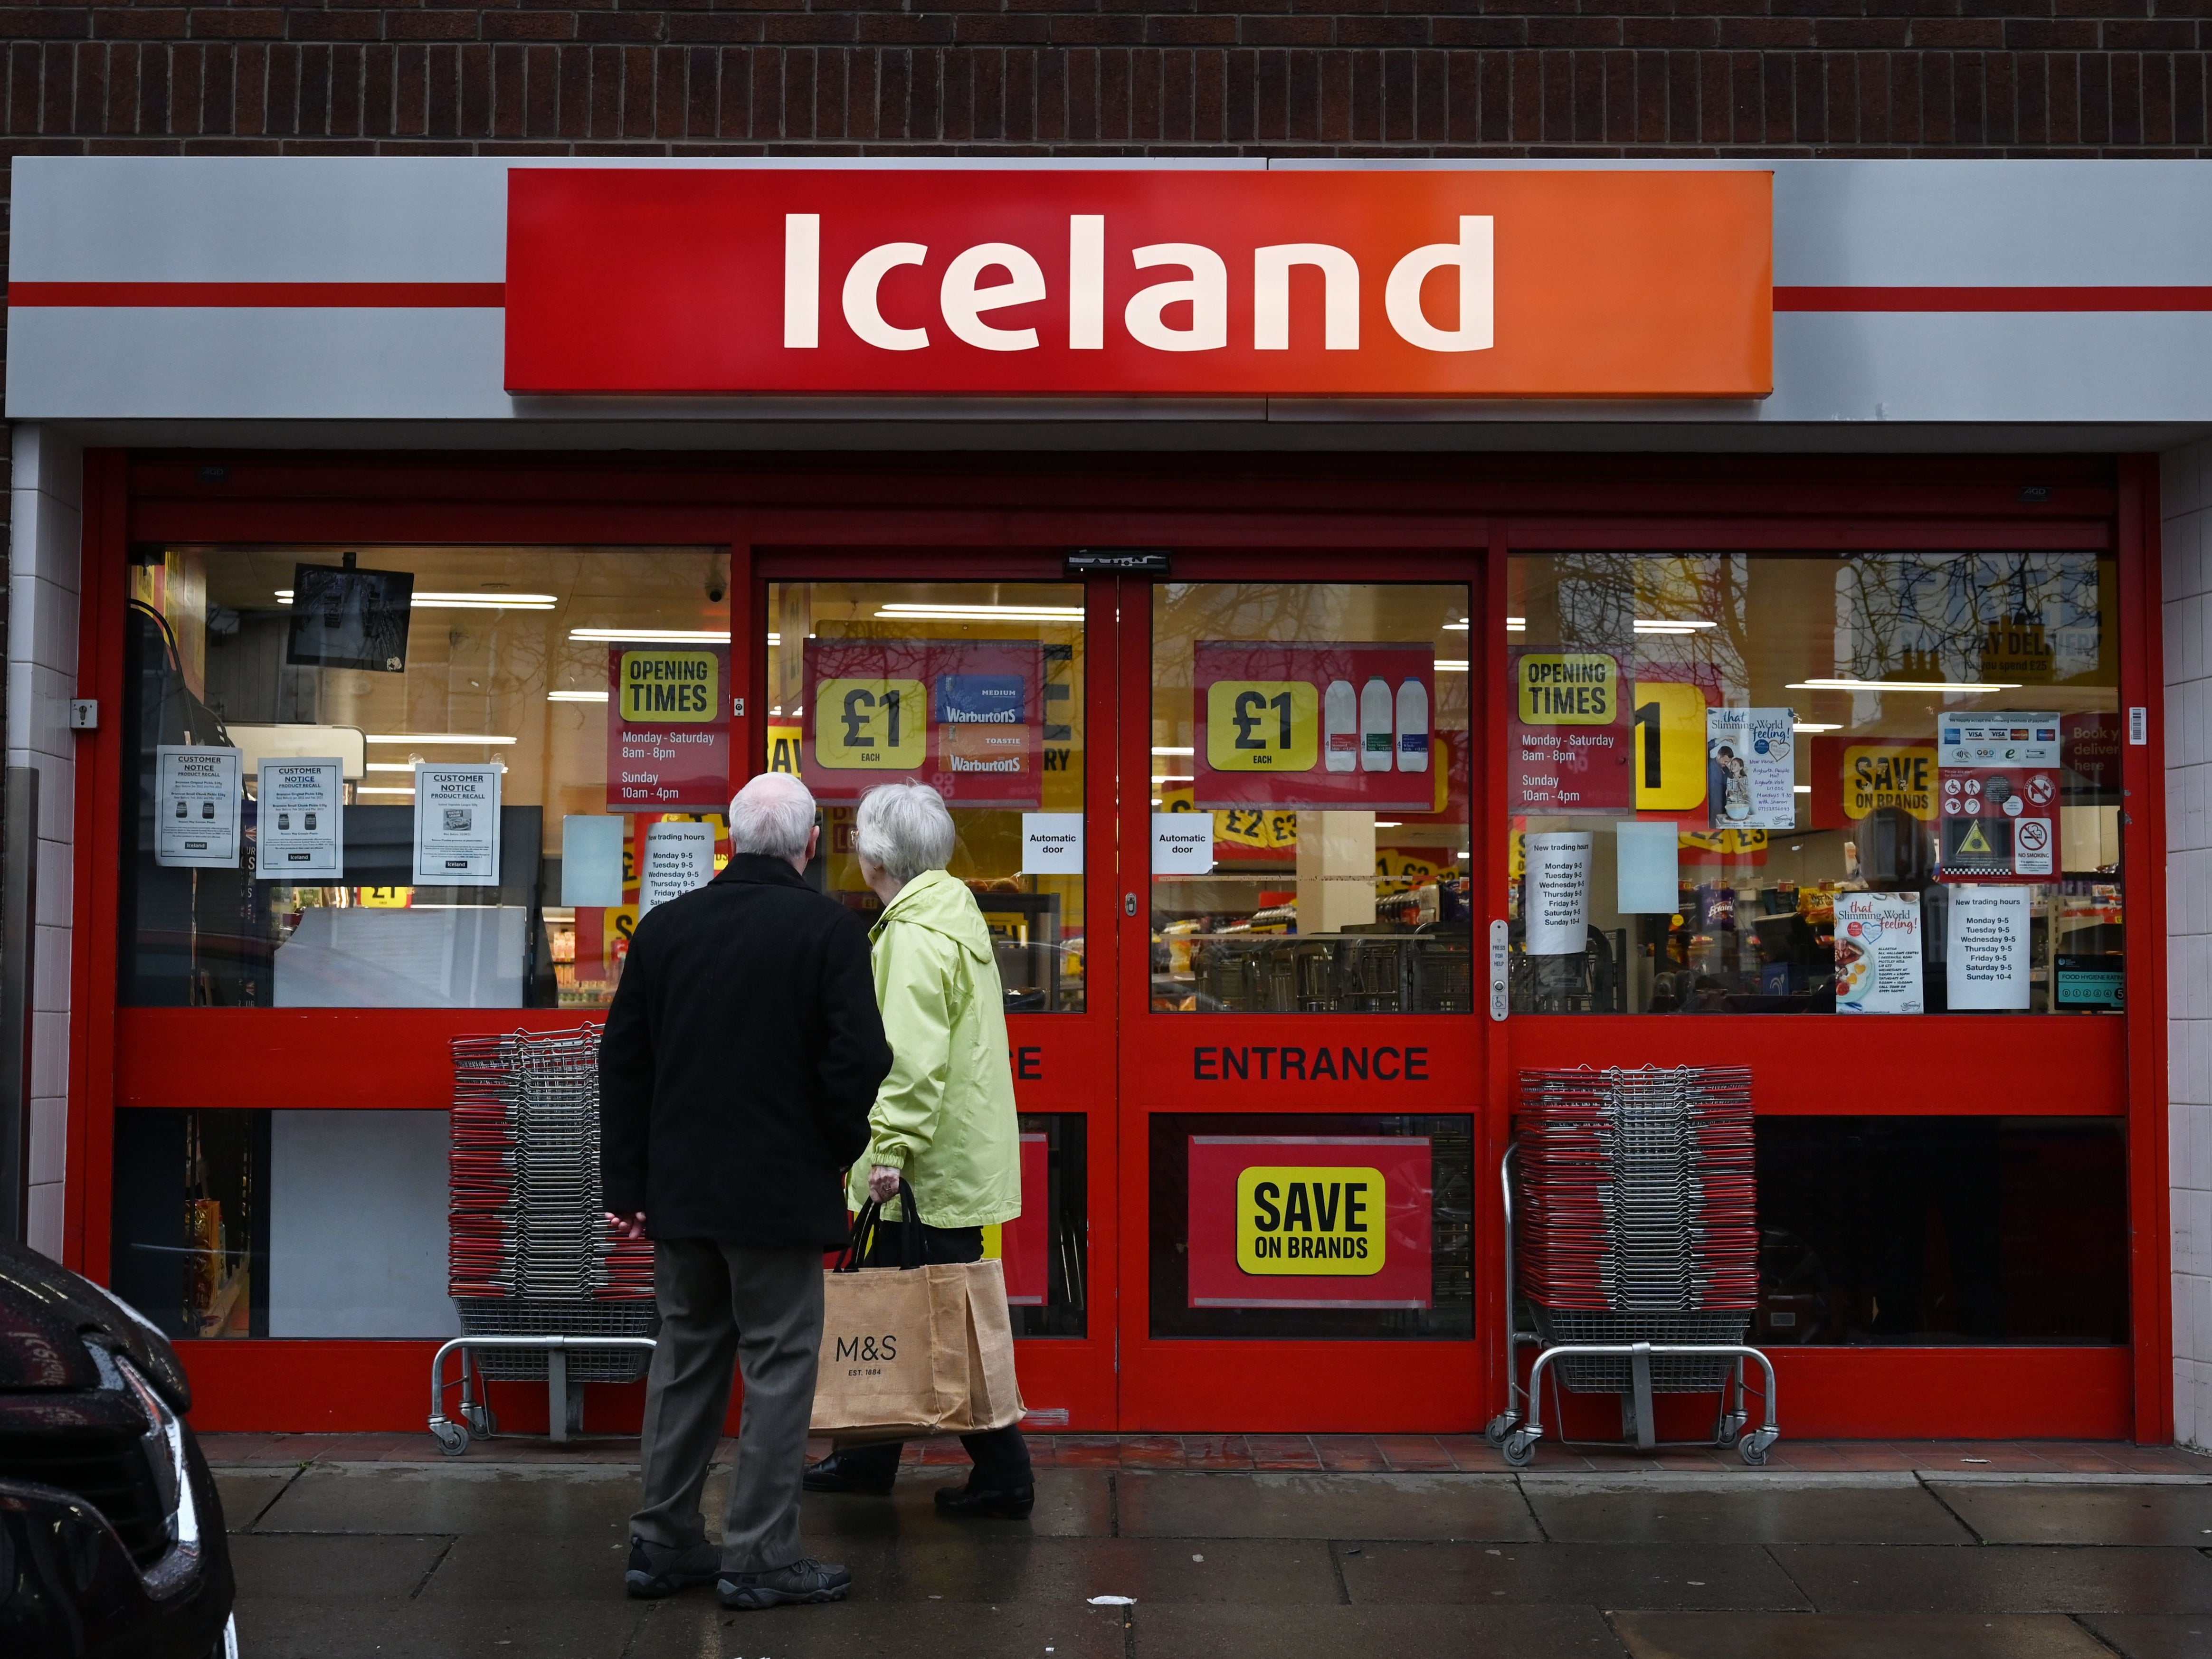 Iceland has come bottom in a new ranking on how sustainable the major supermarkets are